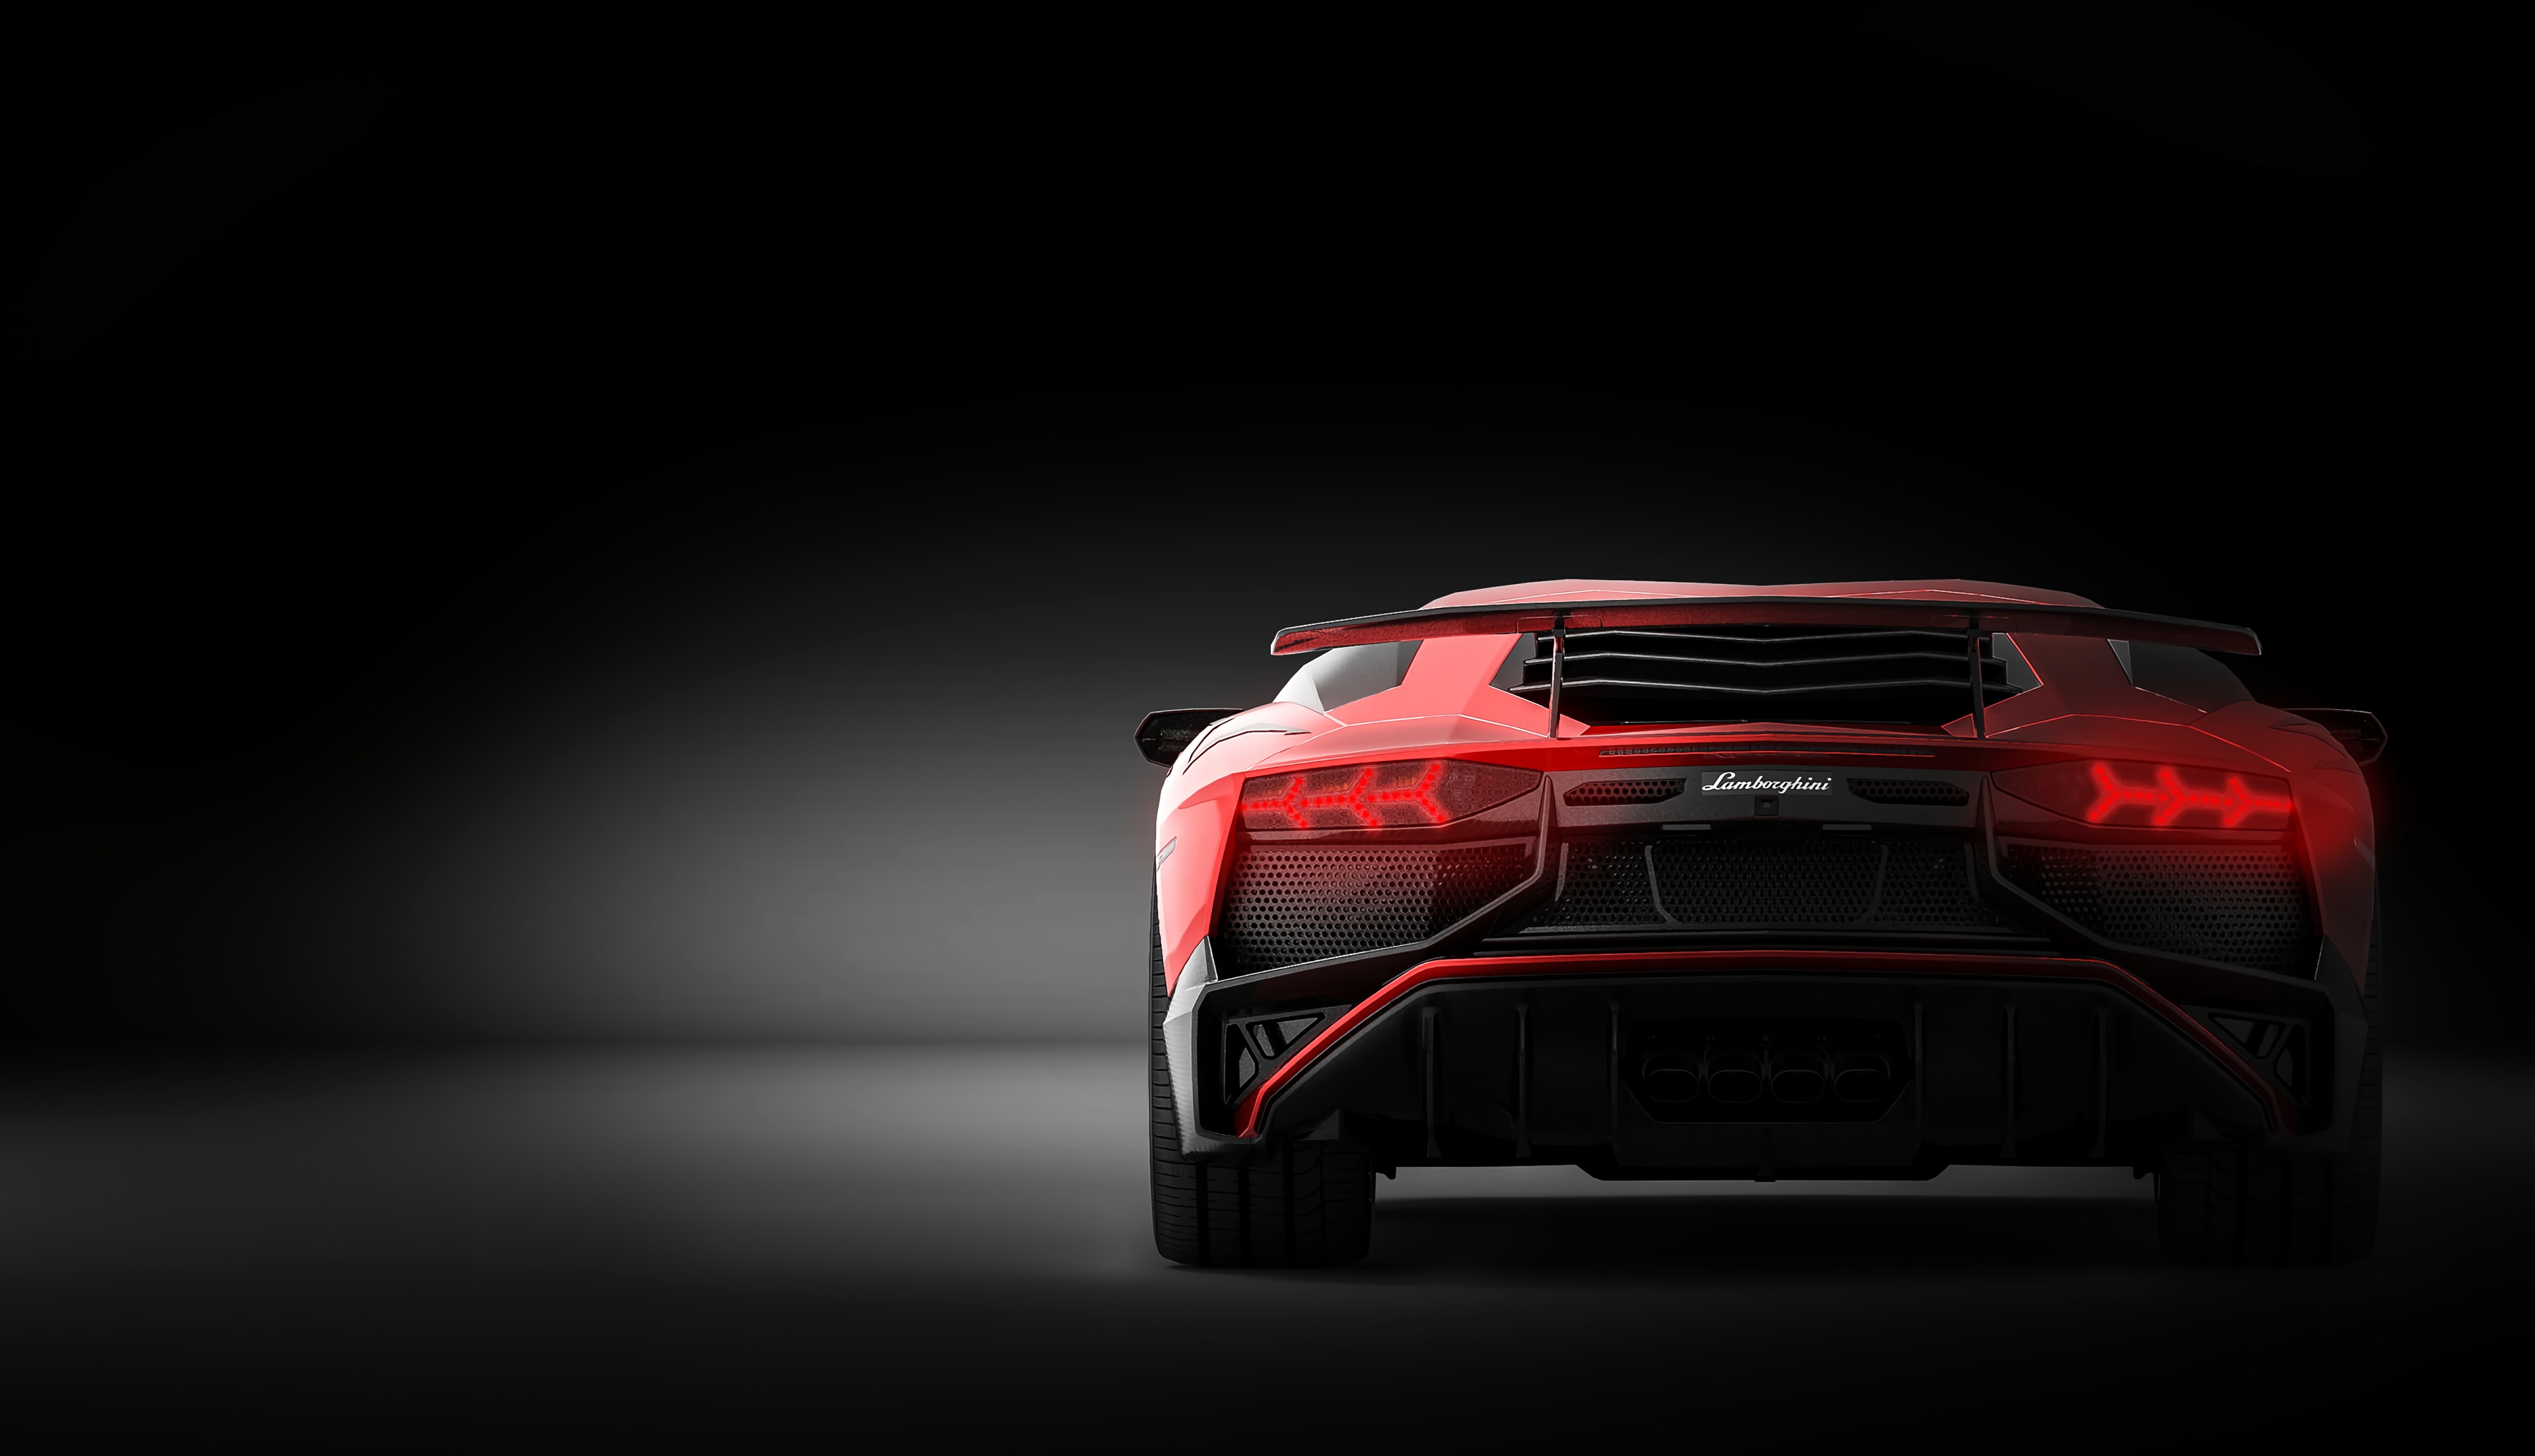 80807 download wallpaper sports, lamborghini, cars, red, car, sports car, lamborghini aventador screensavers and pictures for free